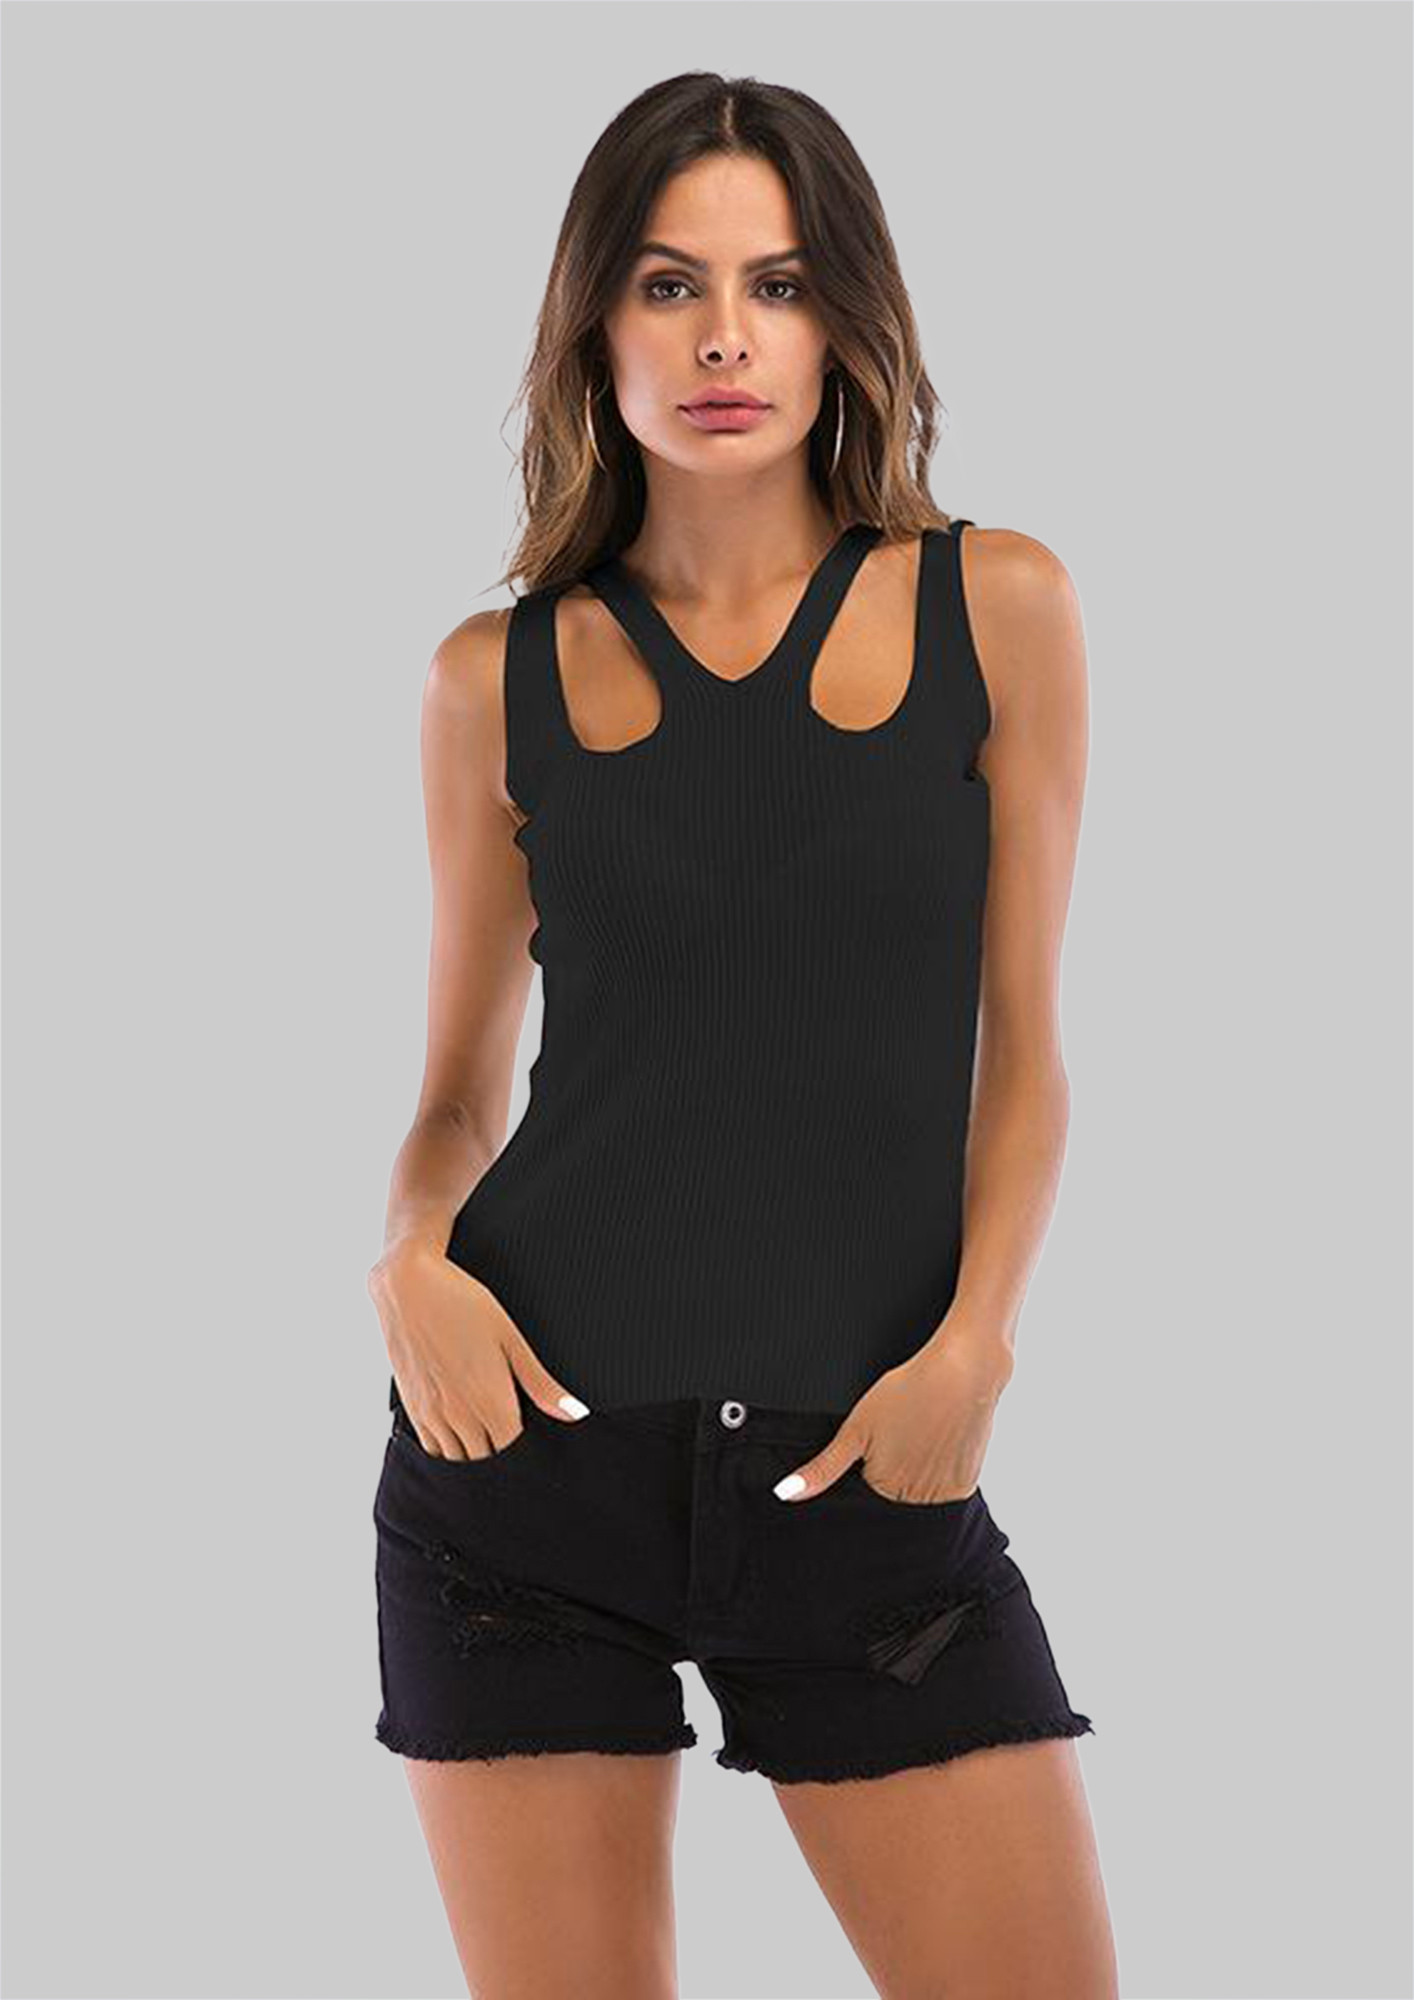 BLACK CUT-OUT NECK DETAIL SLEEVELESS TOP